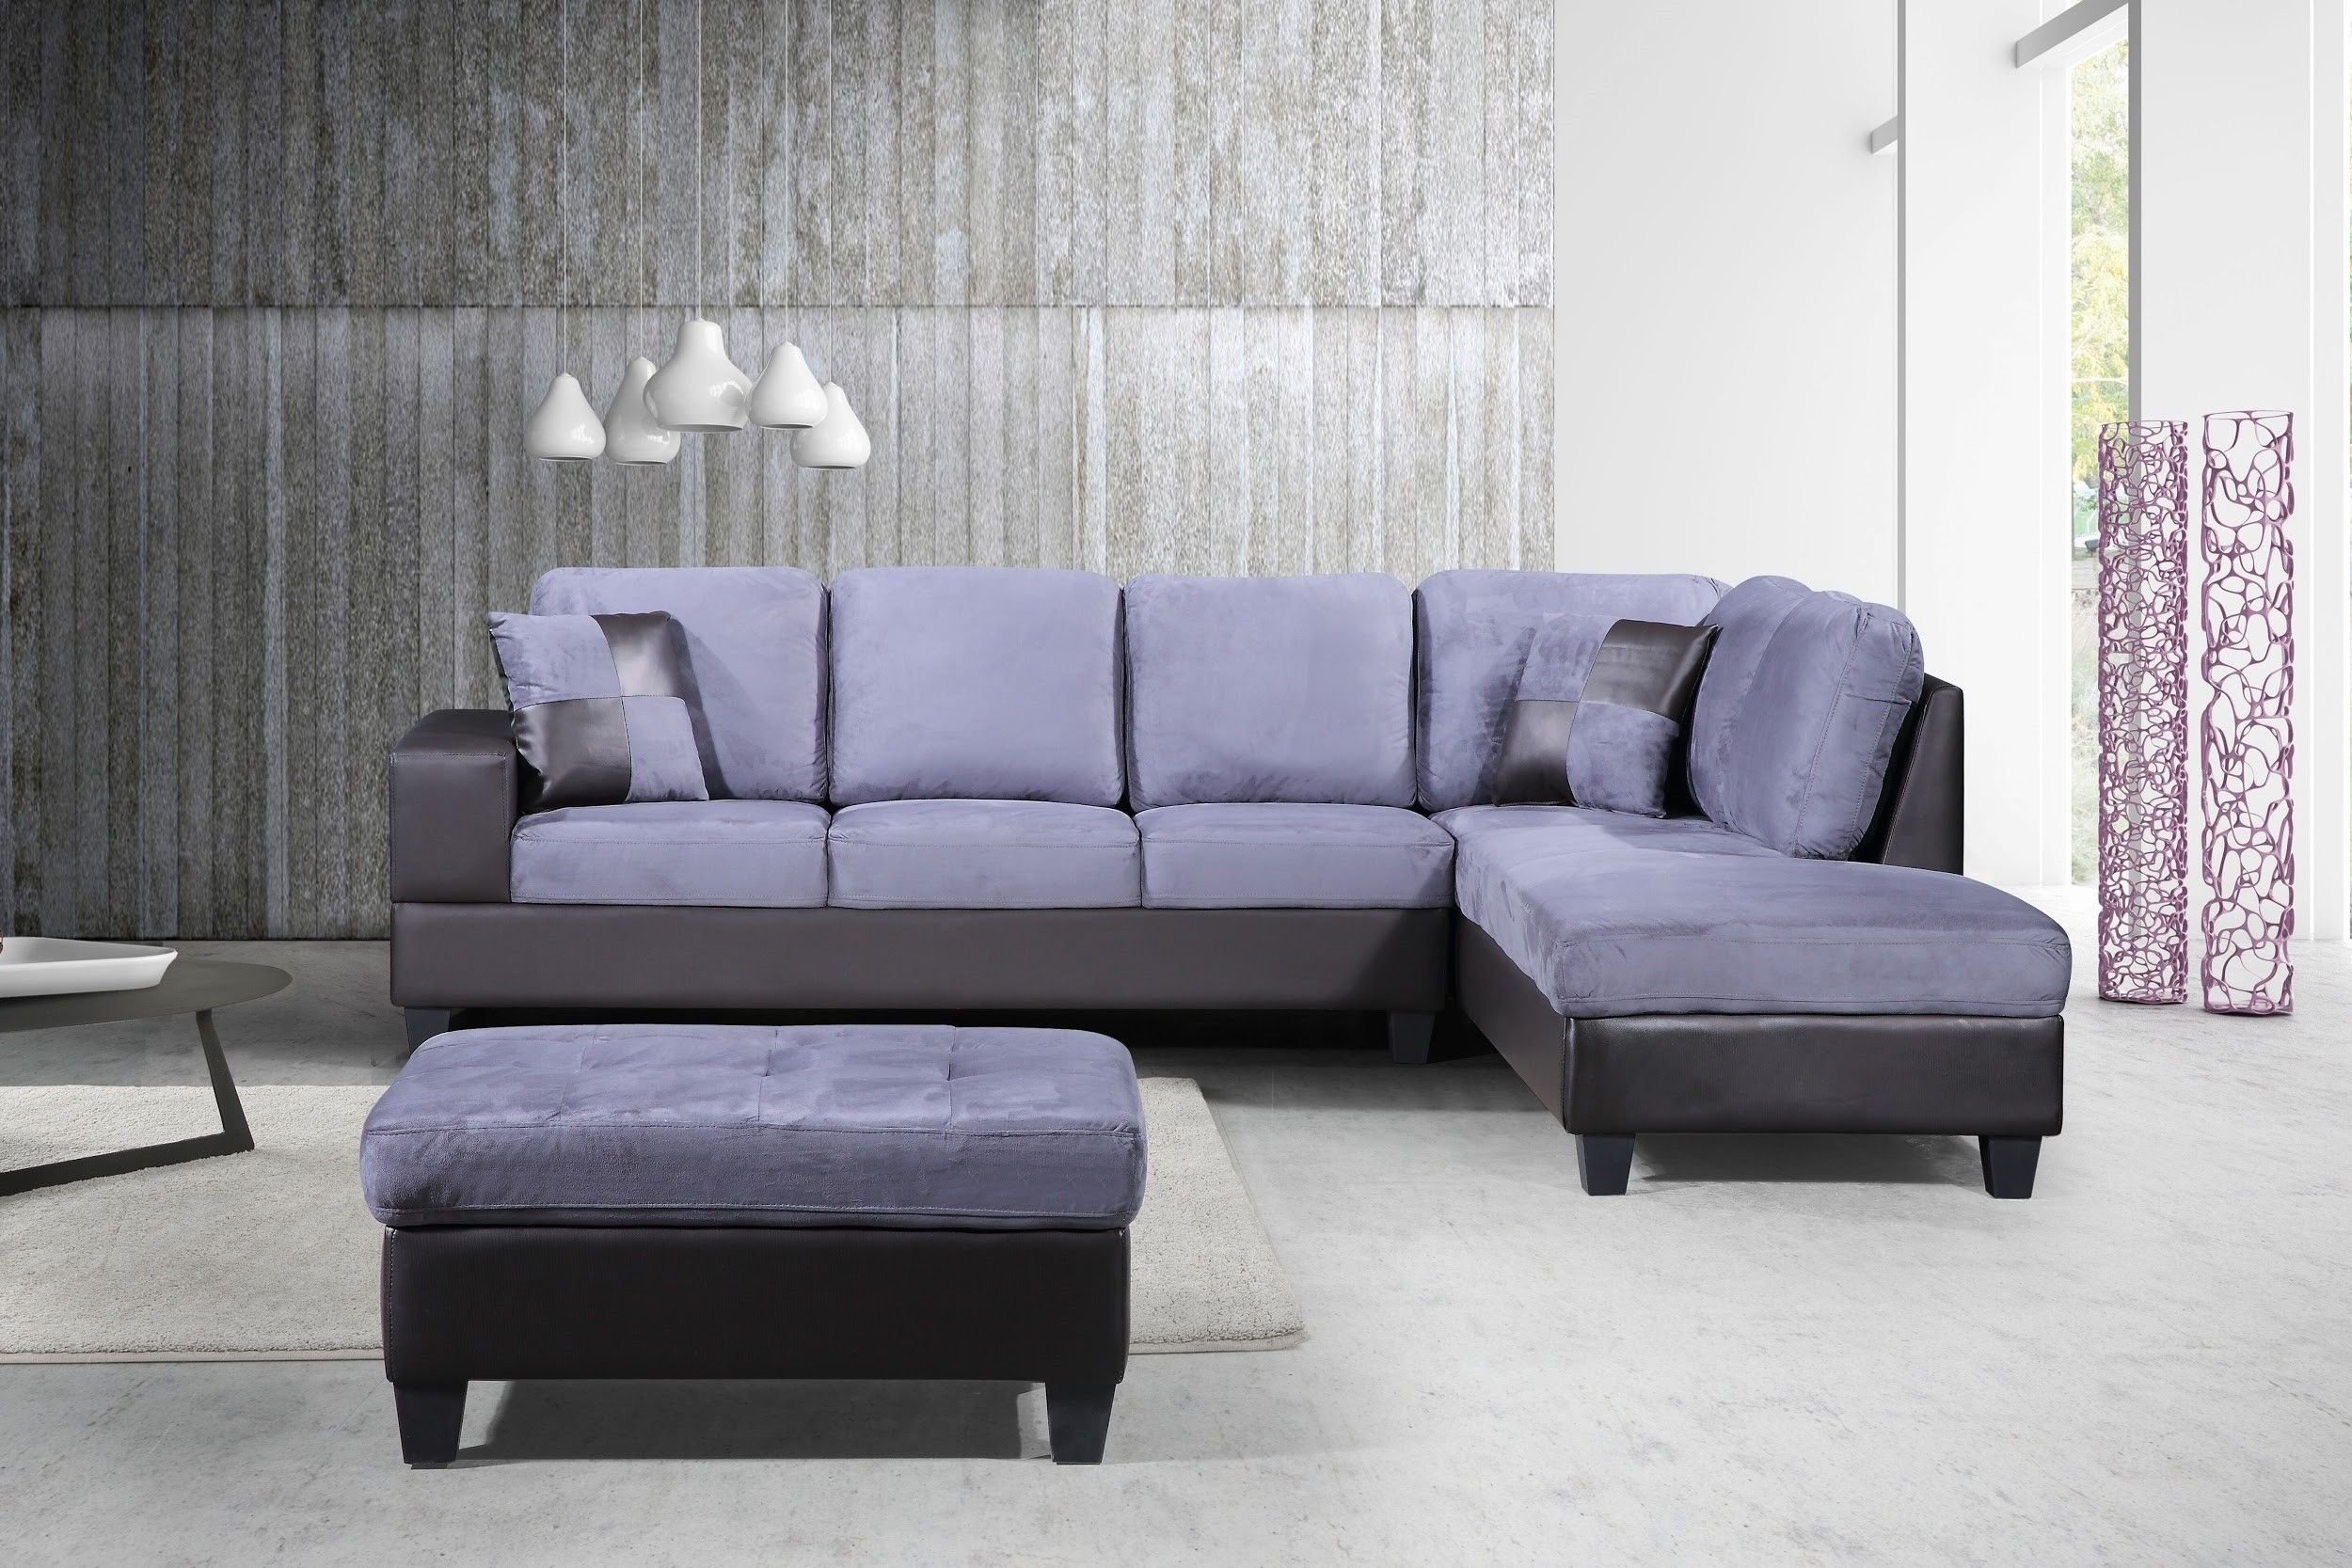 3 Piece Modern Right Microfiber / Faux Leather Sectional Sofa Set W In Faux Leather Sectional Sofa Sets (Gallery 12 of 21)